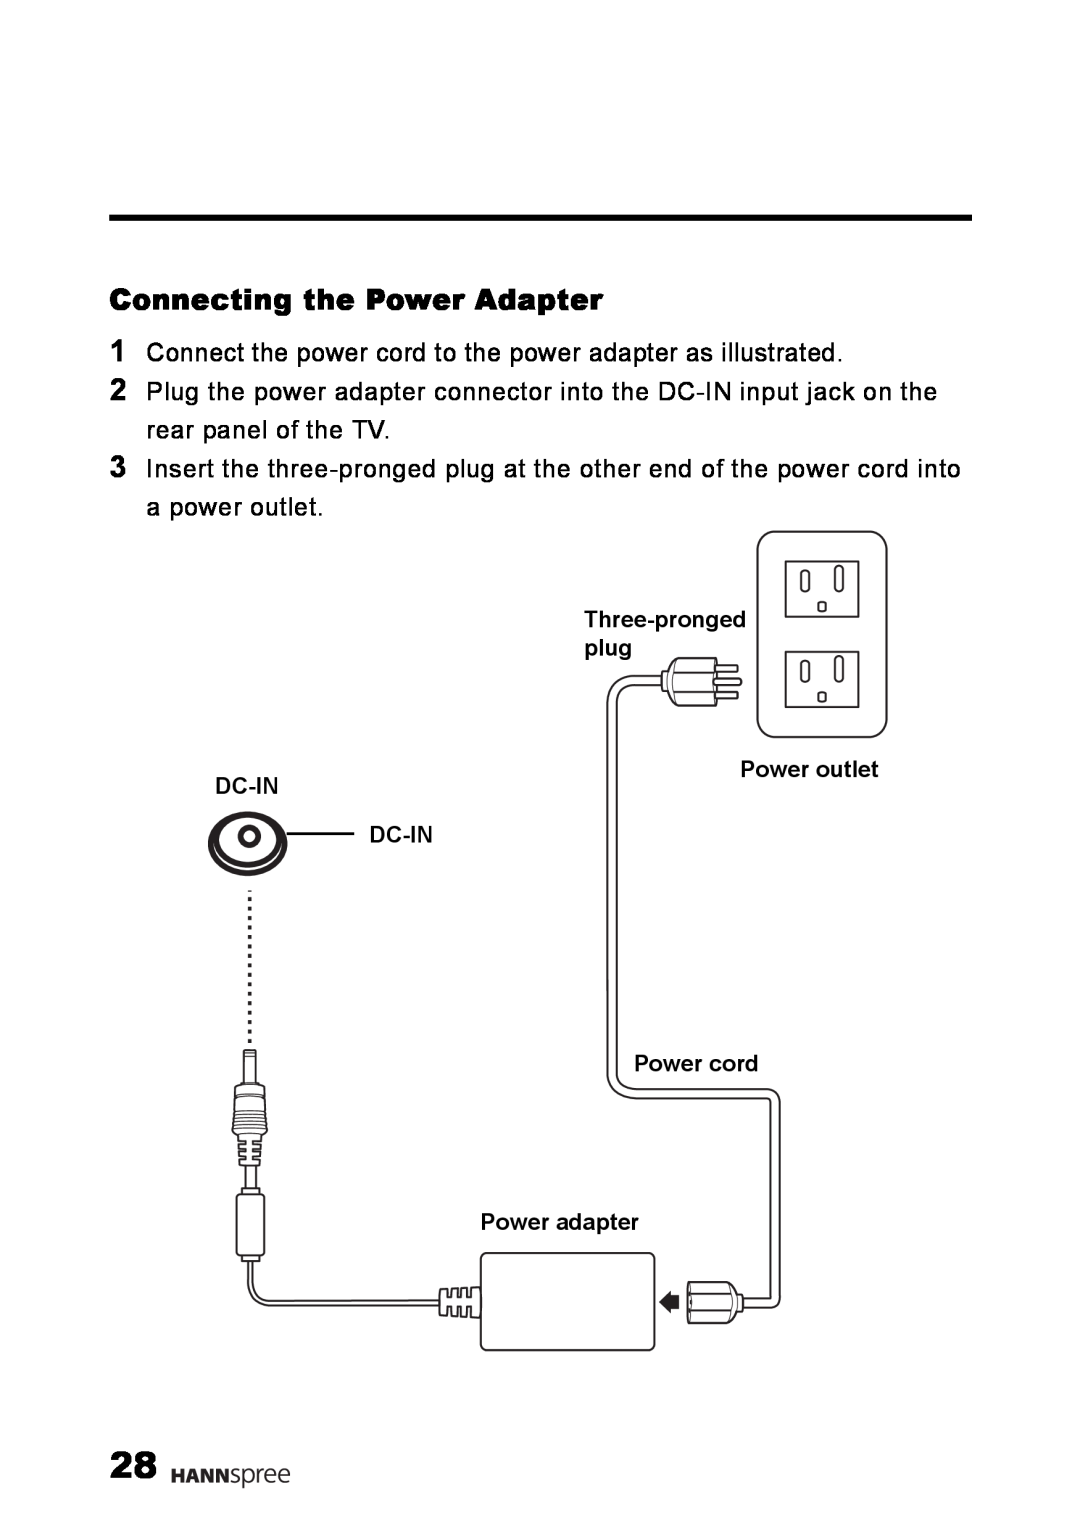 HANNspree LT02-12U1-000 user manual Connecting the Power Adapter, DC-IN input jack 